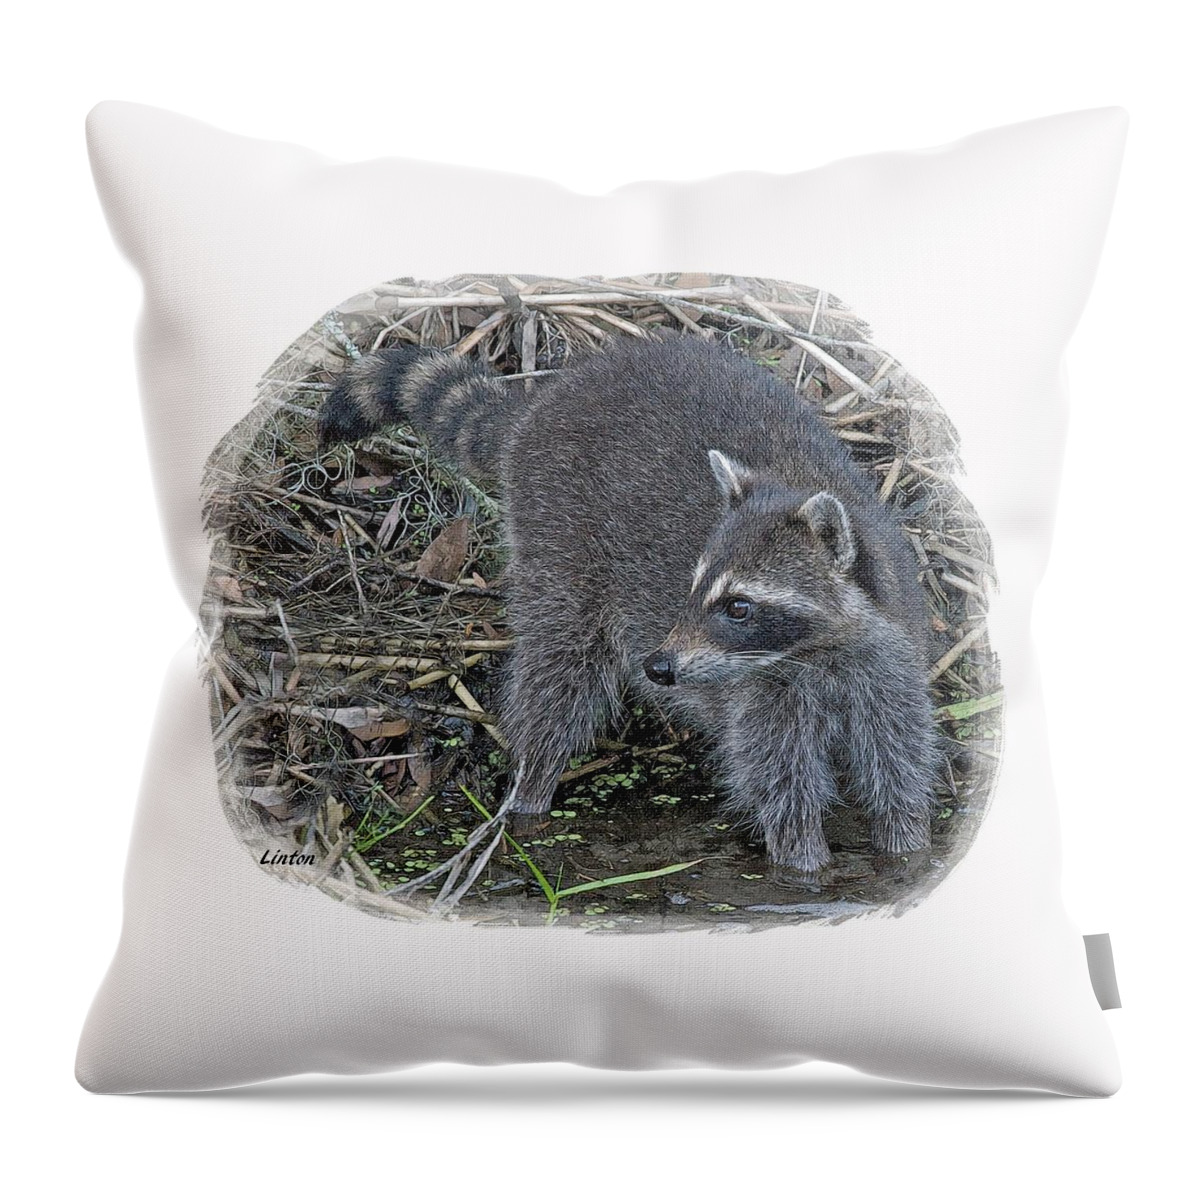 Raccoon Throw Pillow featuring the digital art Raccoon by Larry Linton